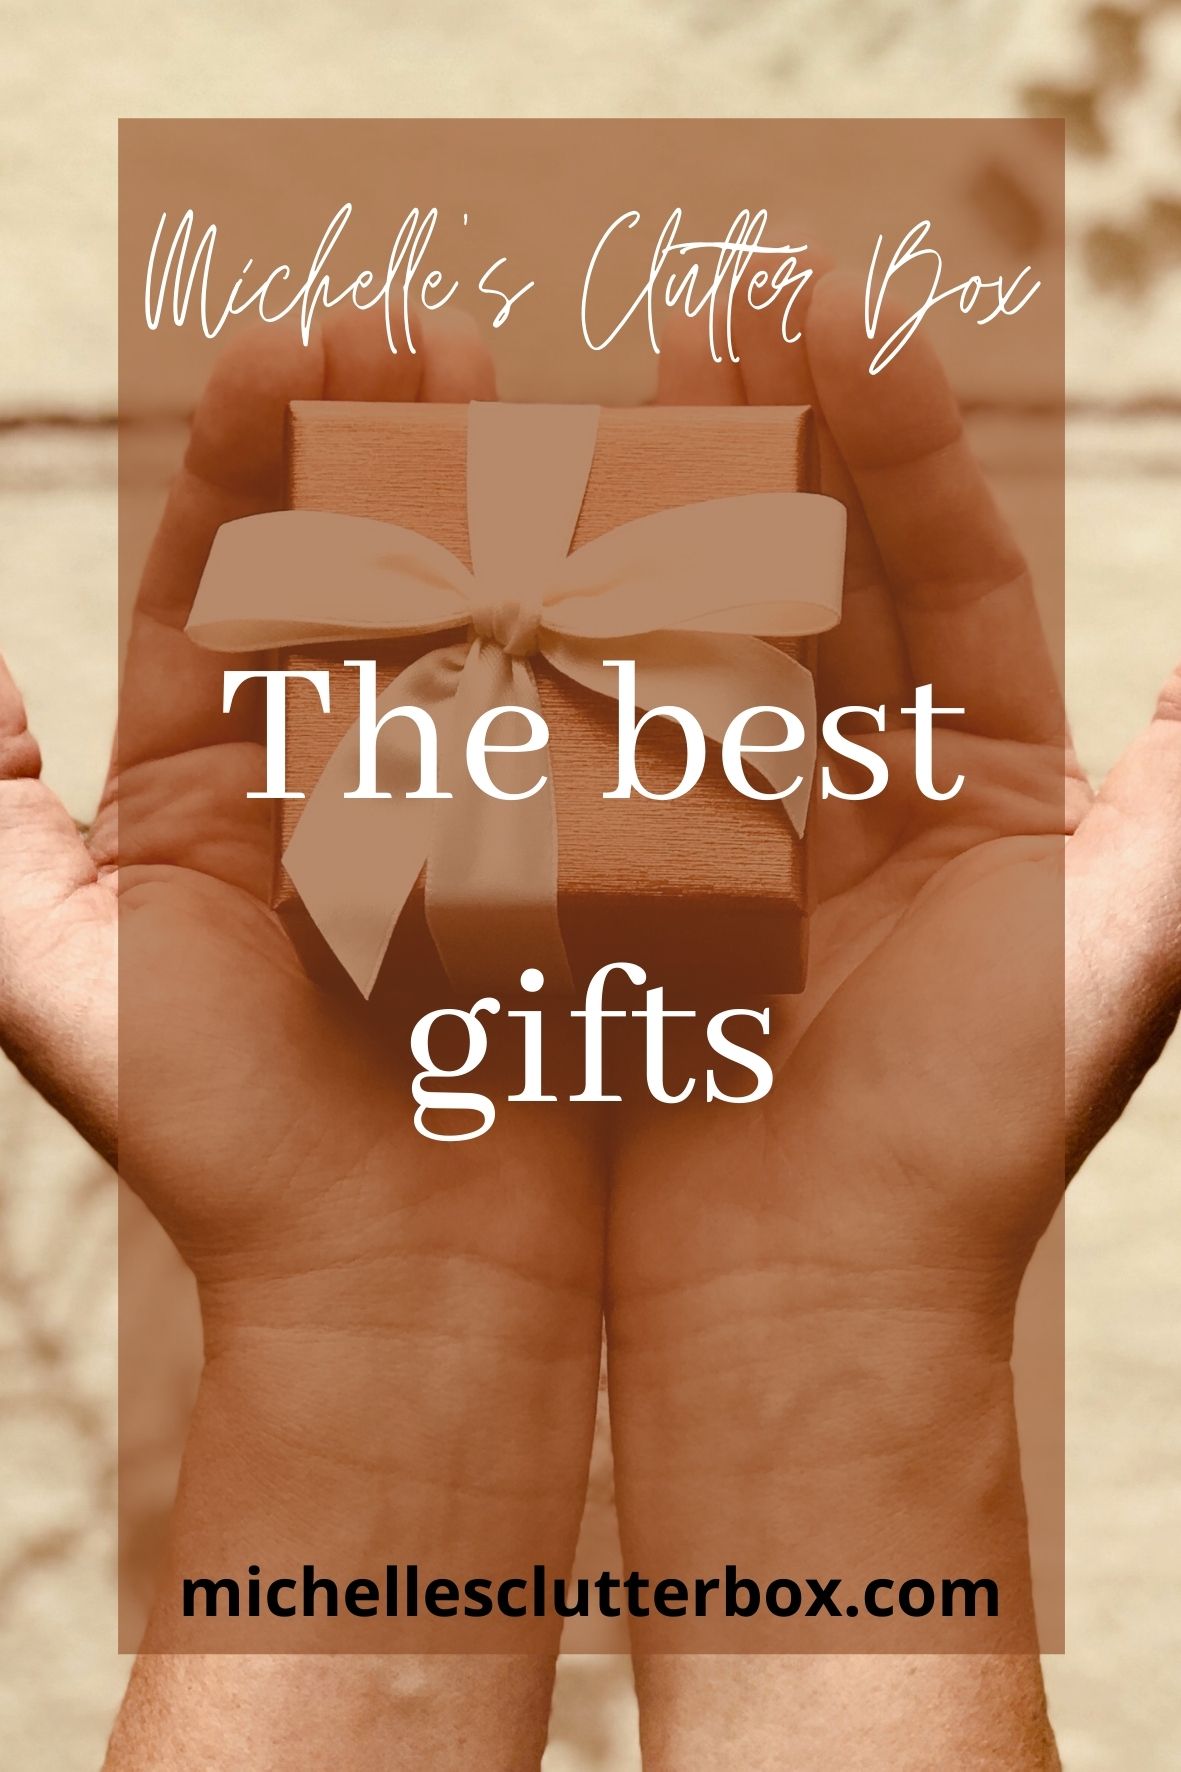 The best gifts